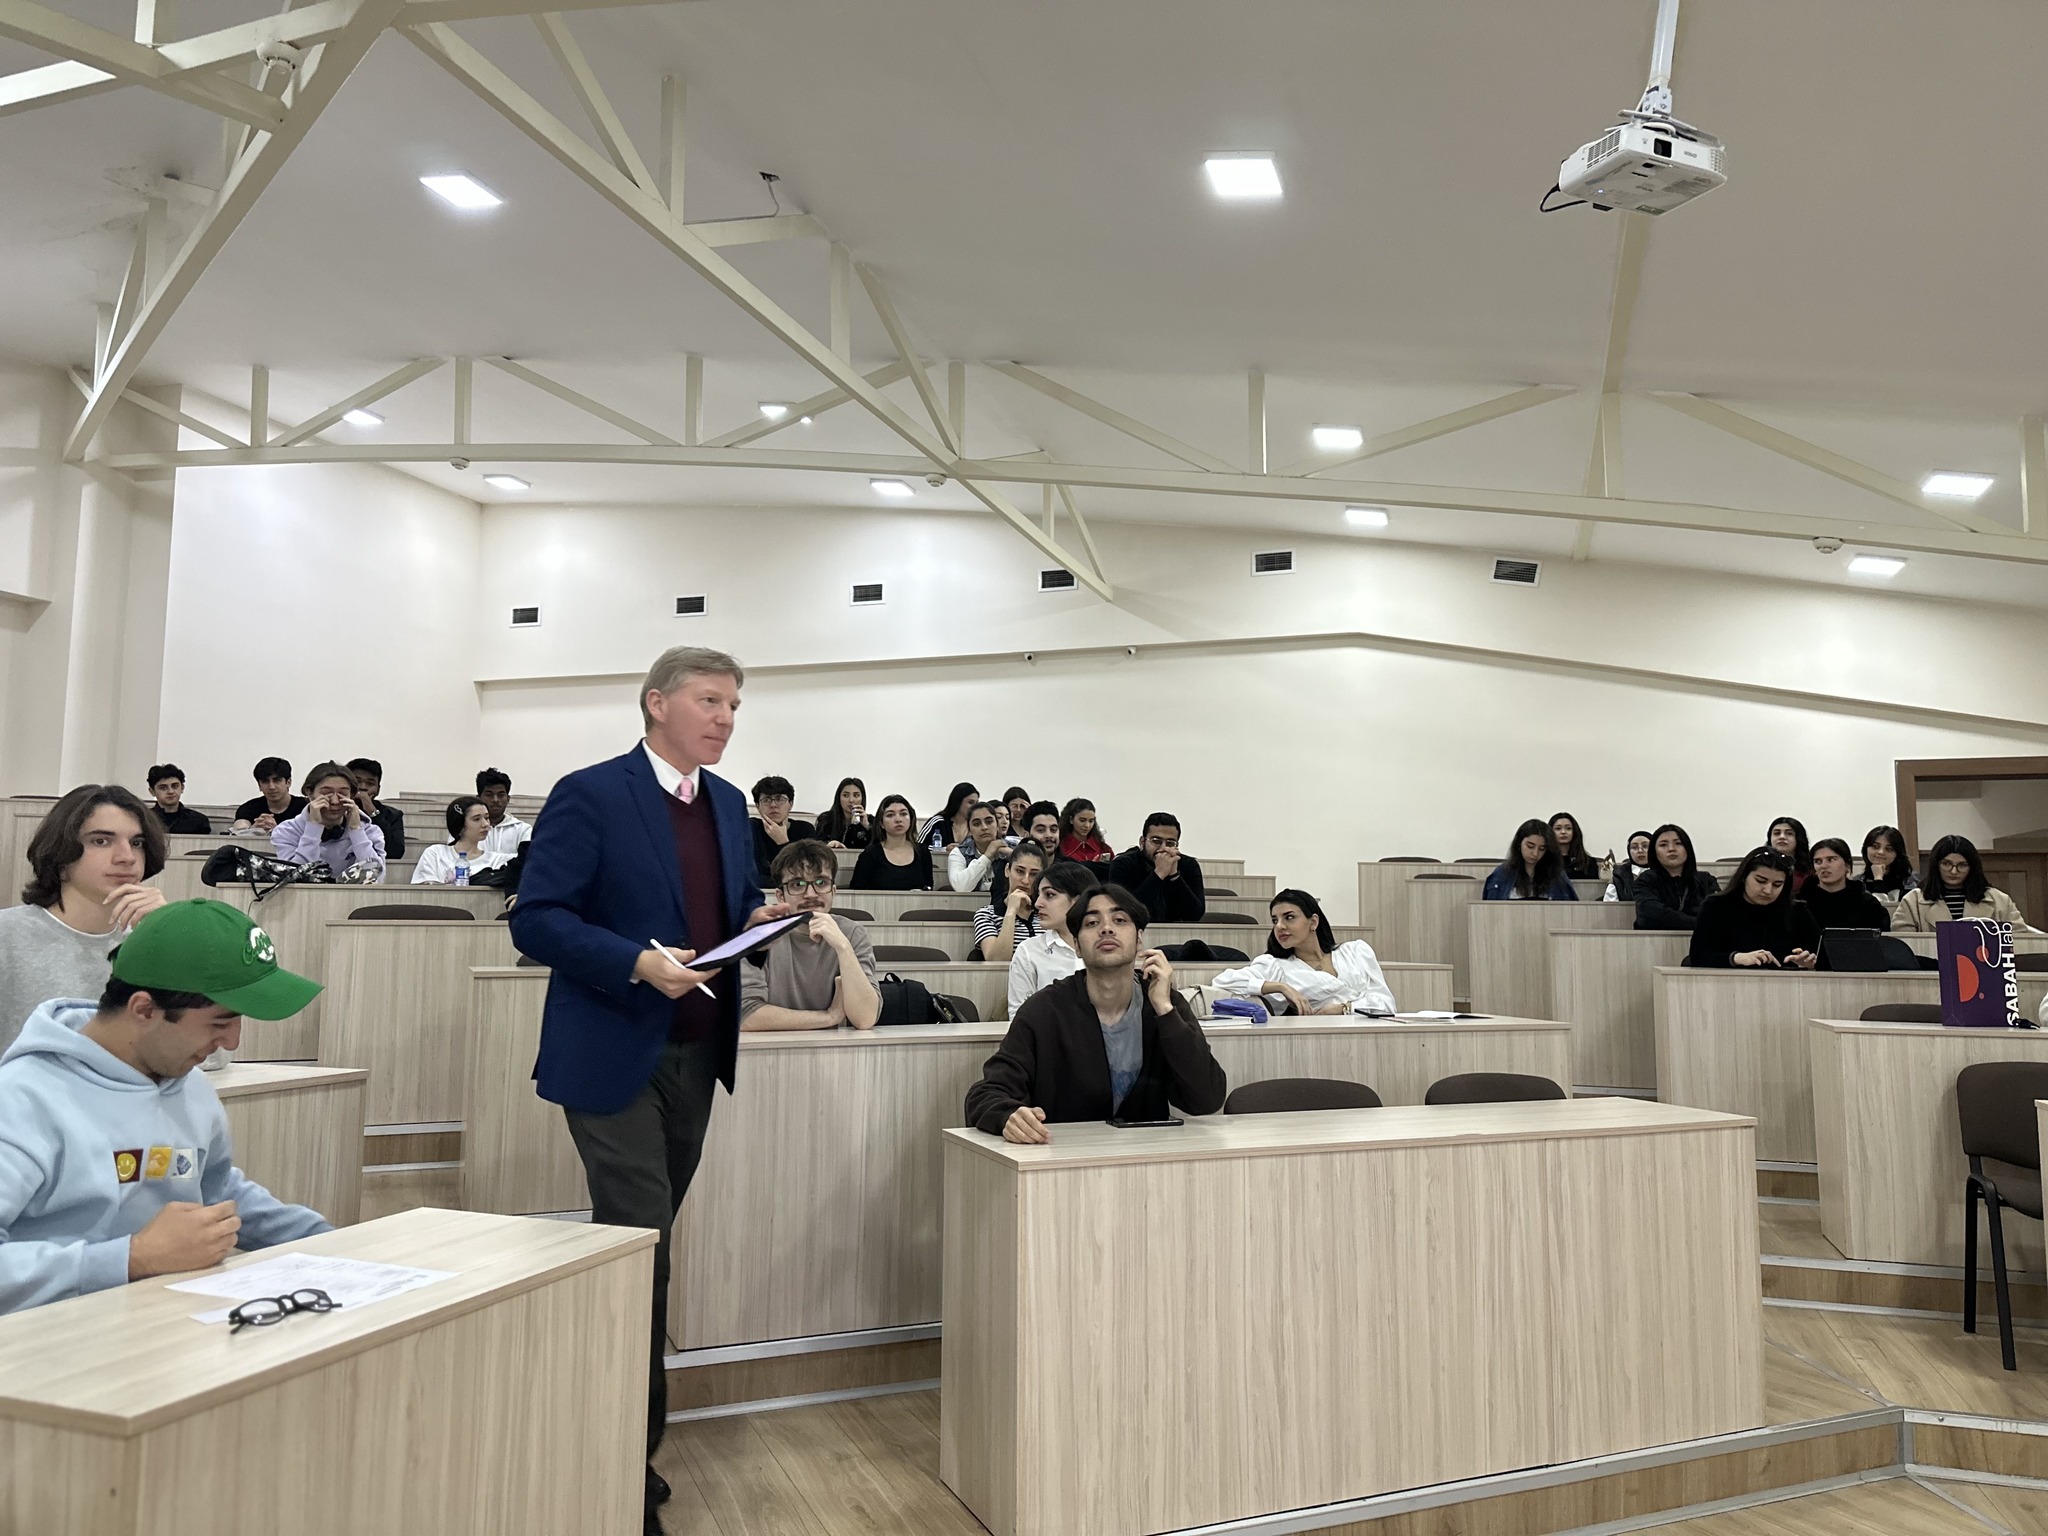 Professor of Stanford University Delivers a Lecture to WCU Students